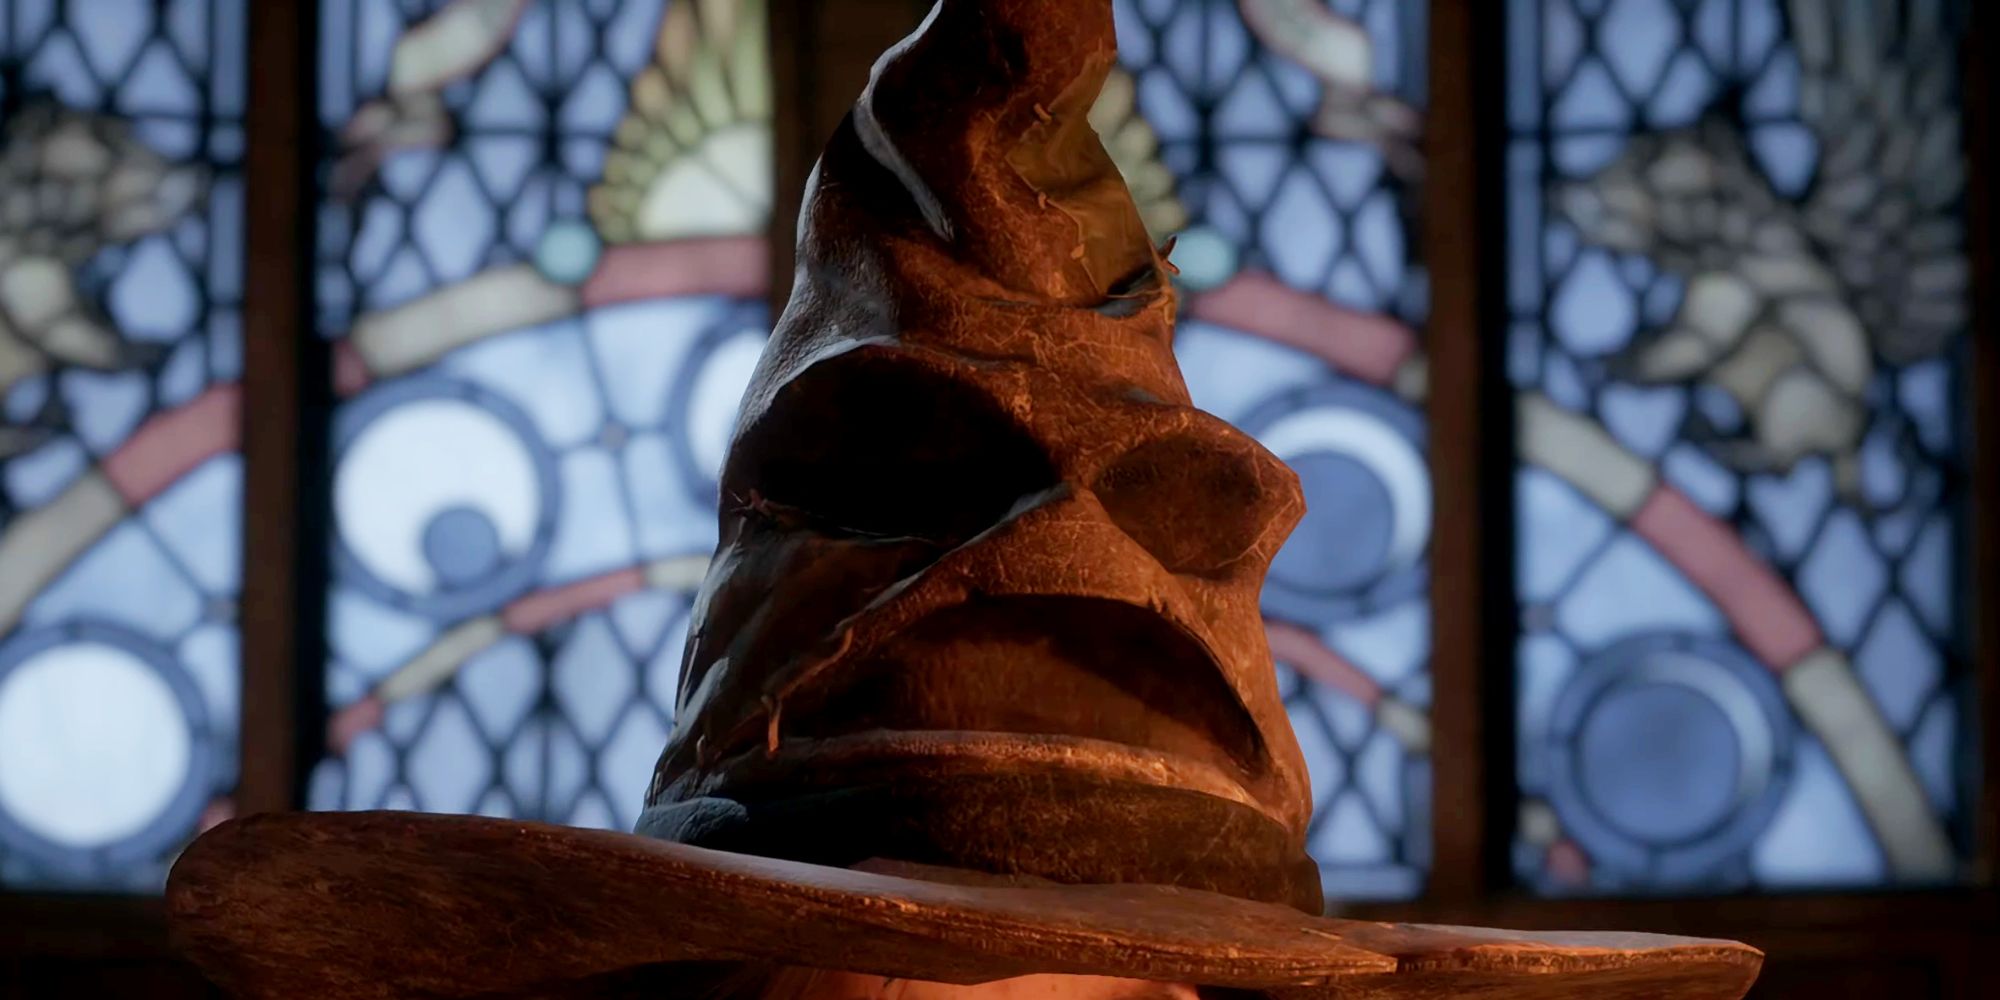 The Sorting Hat sitting on top of a Hogwarts Legacy main character's head, with stained glass windows in the background.